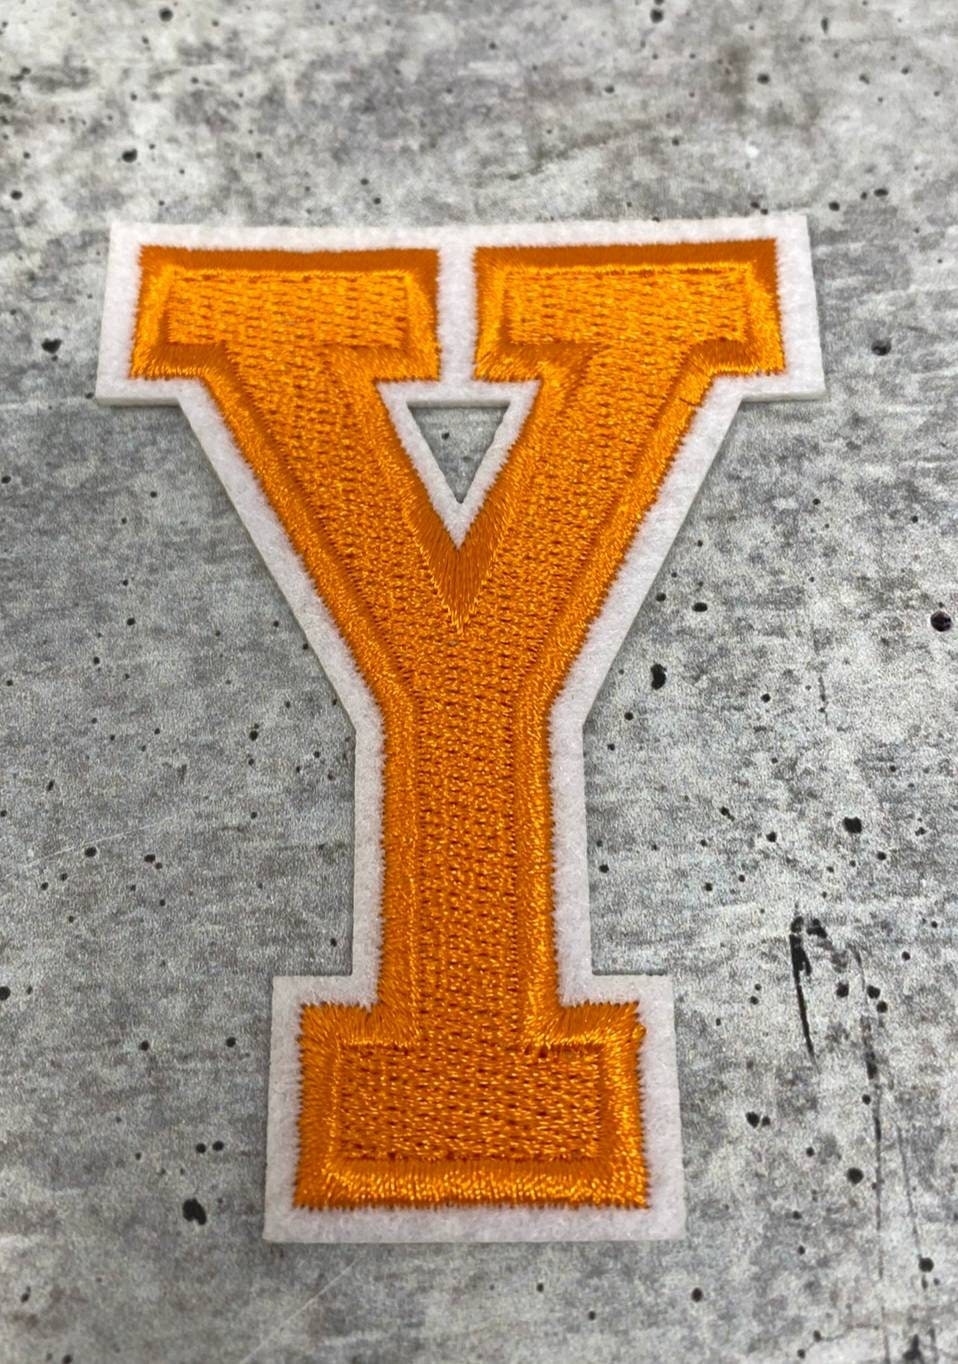 New, "ORANGE" "3" Embroidered Letter w/White Felt,Varsity Letter Patch, 1-pc, Iron-on Backing, Choose Your Letter, A-Z Letters, DIY Letters,